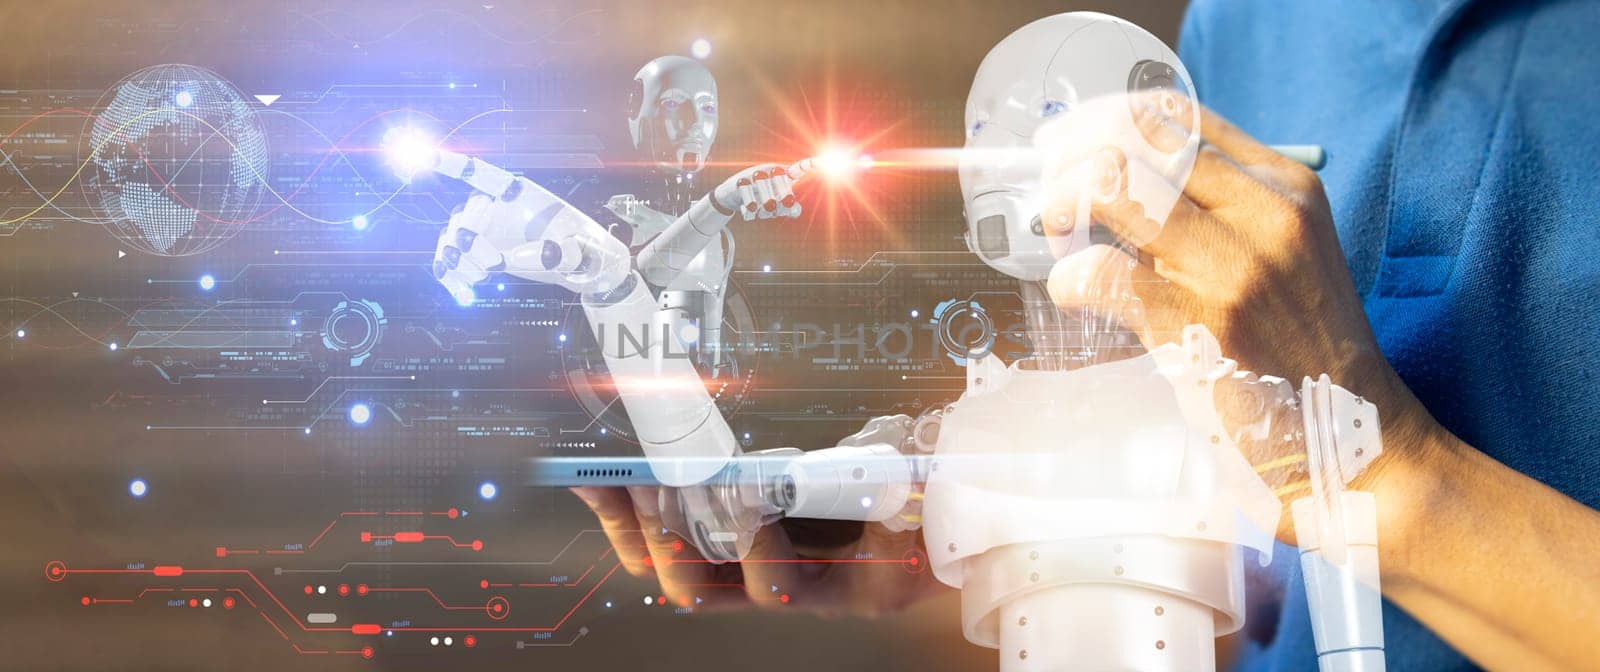 The AI ChatBot concept is unique in that it can interact as naturally as a real human. Industry Innovation 5.0 by boonruen